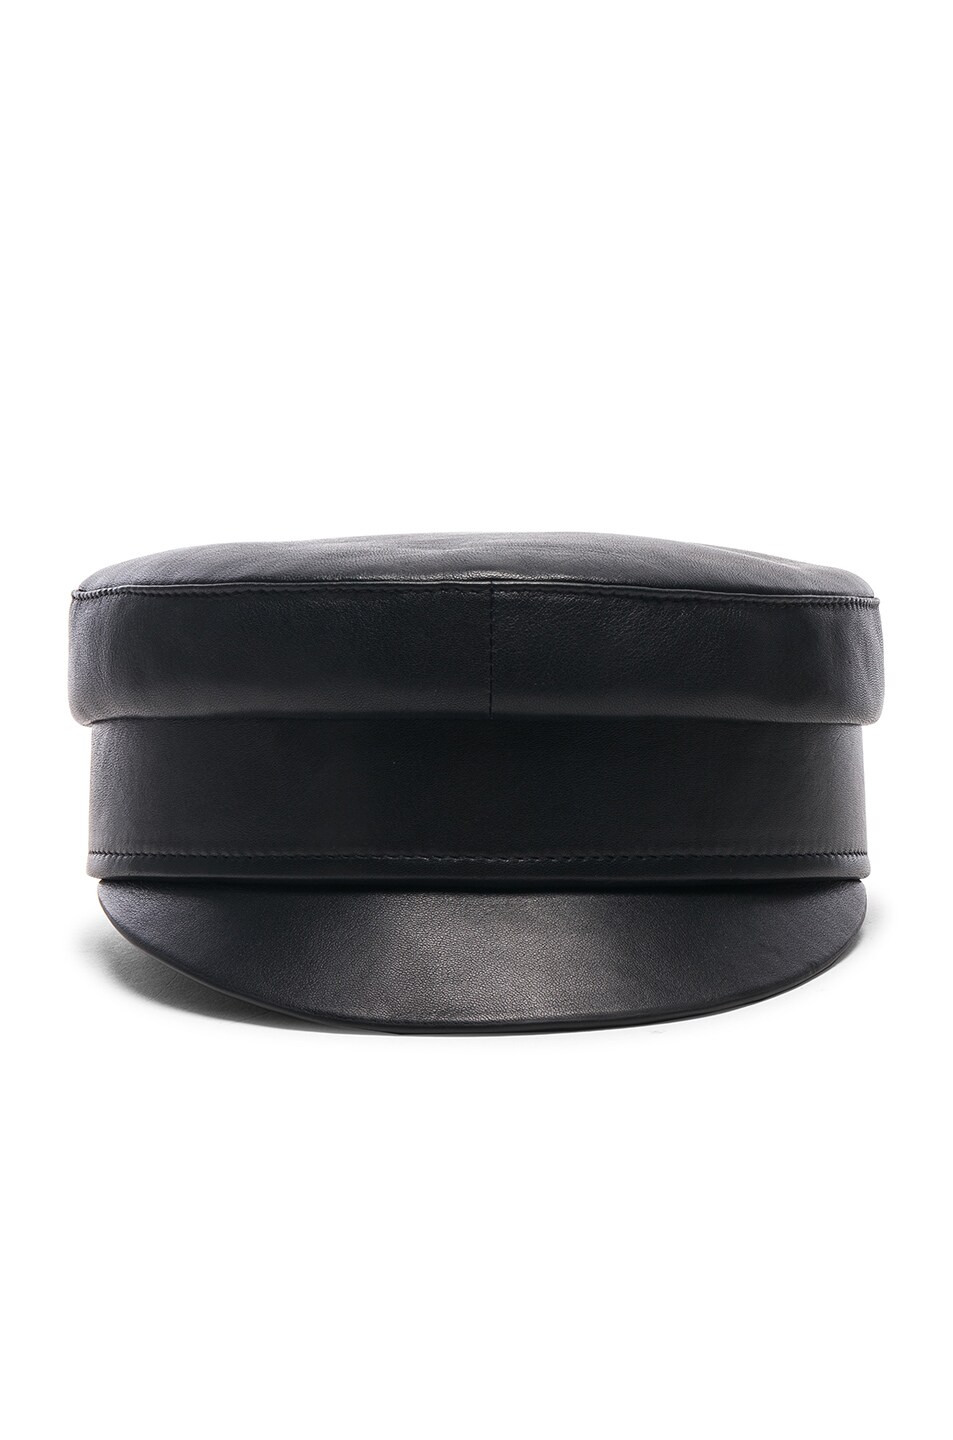 Image 1 of Palmer Girls x Miss Sixty Leather Cap in Black